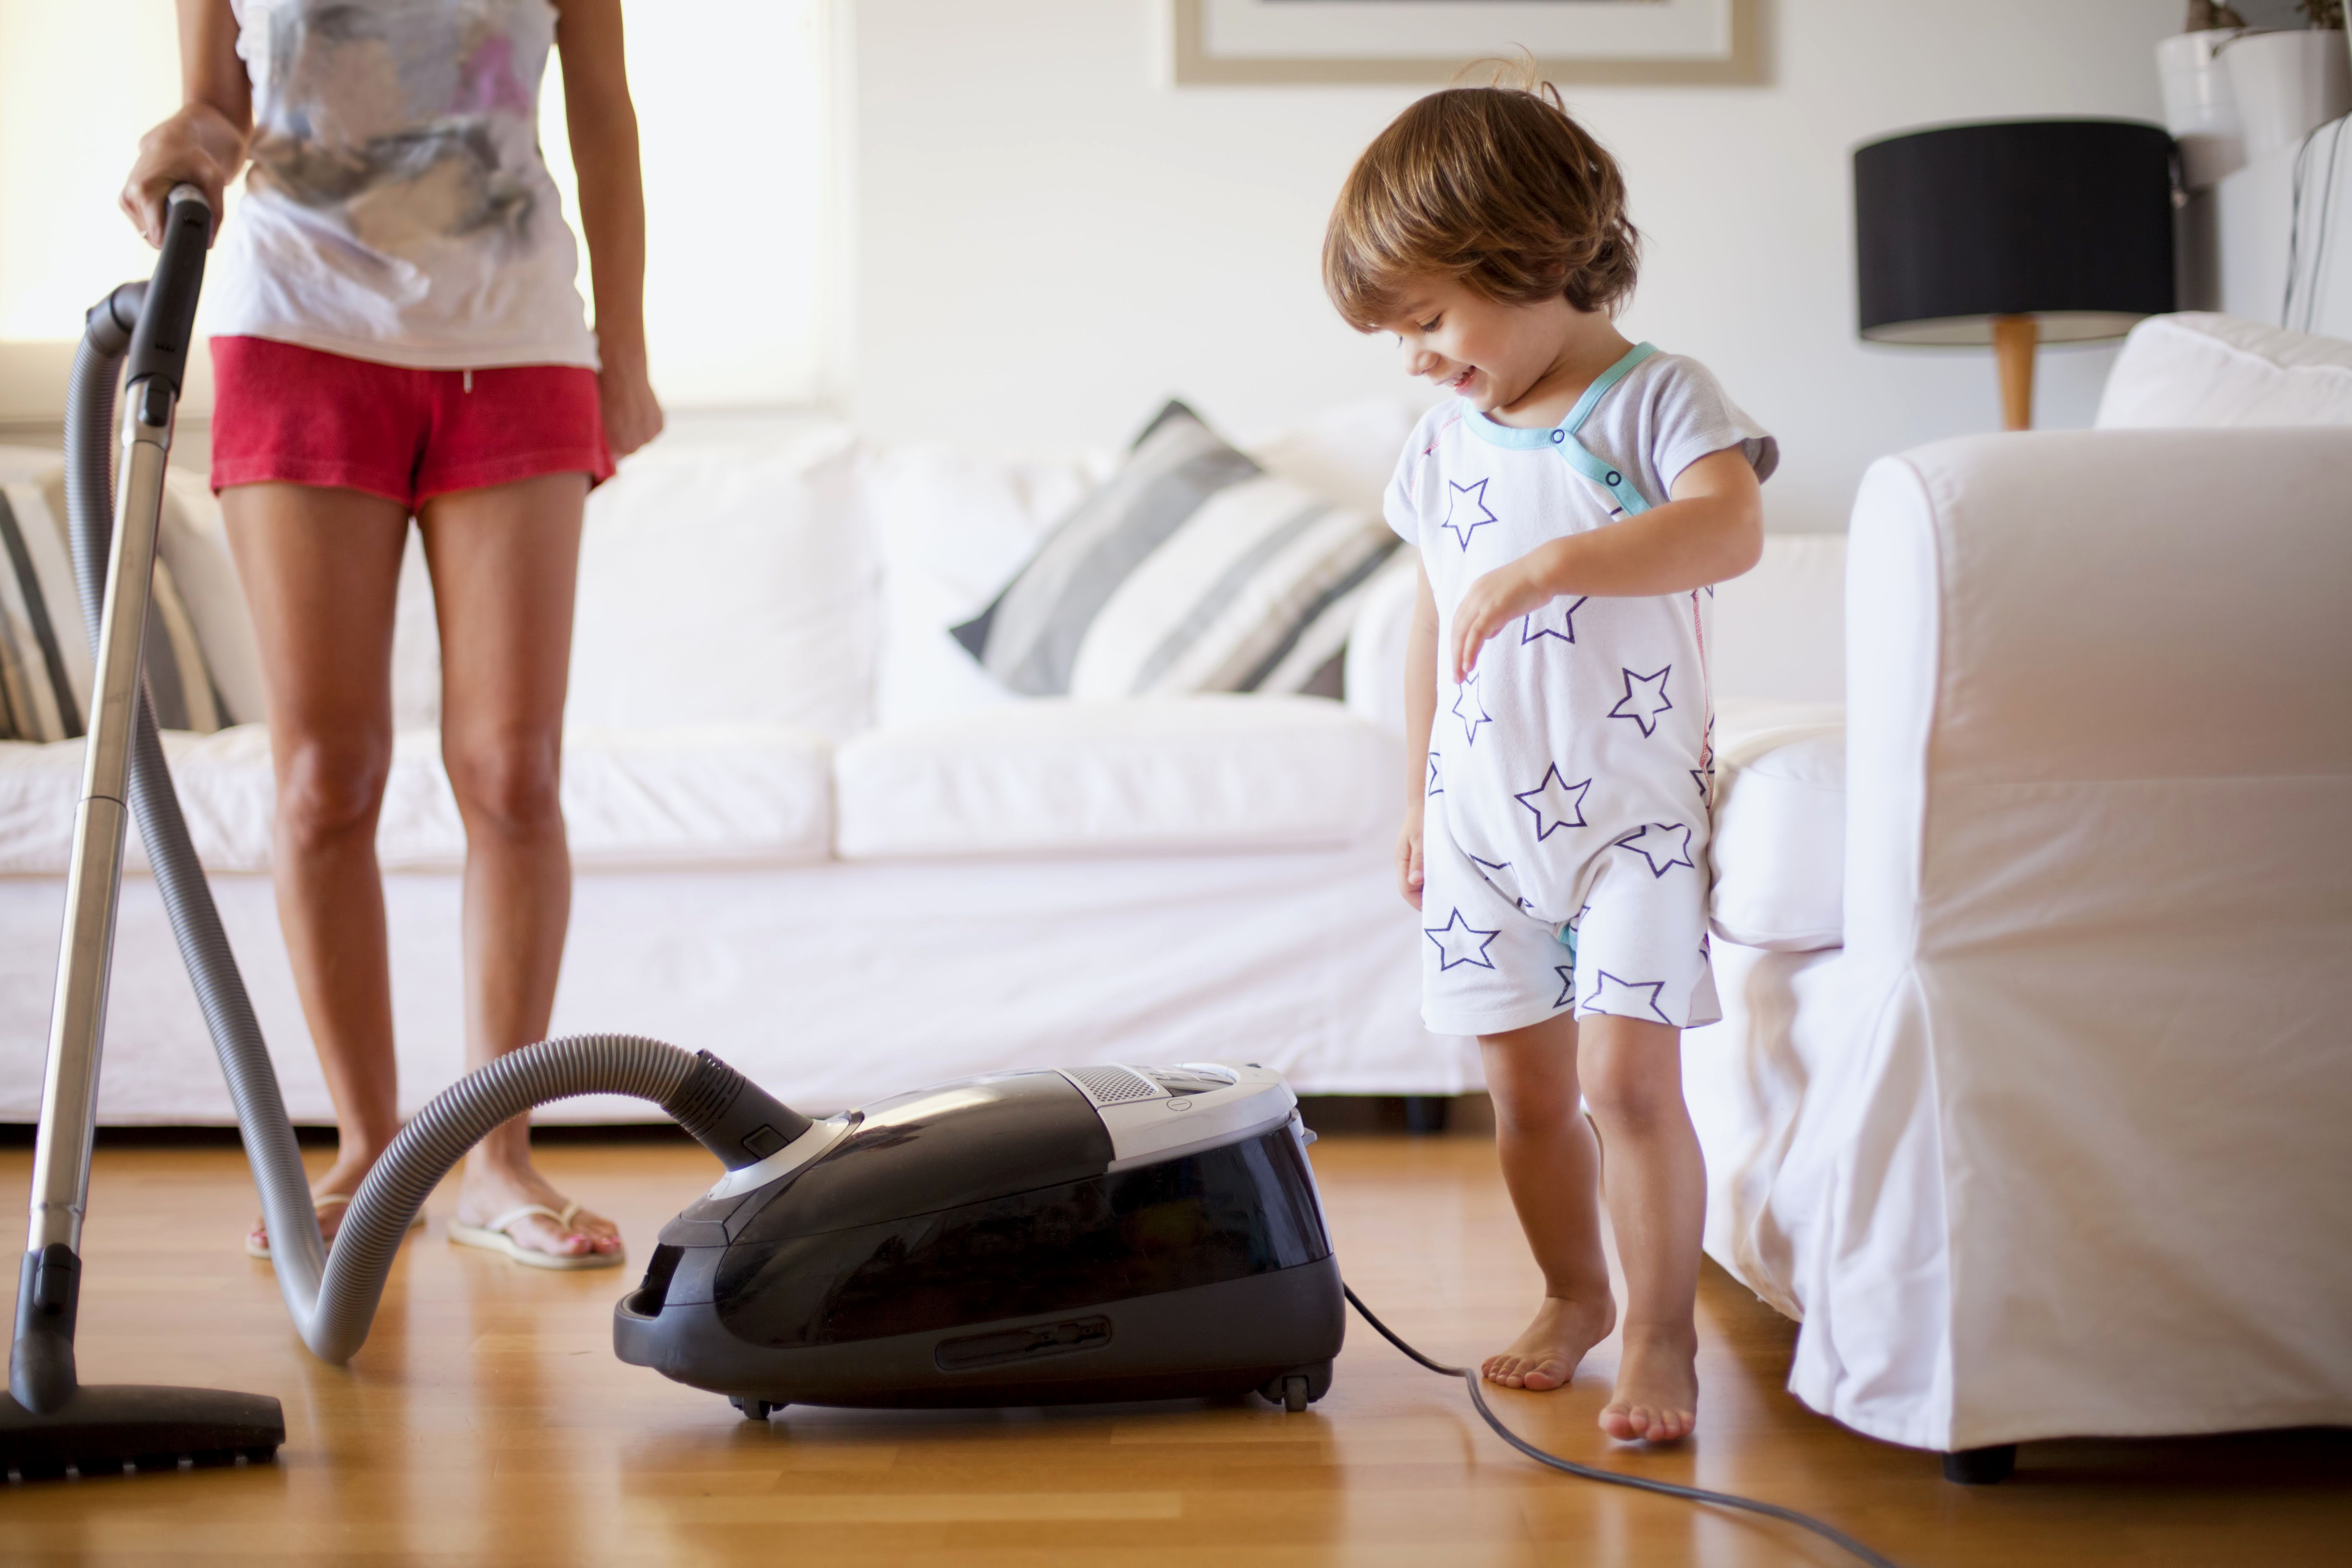 29 Great Best Vacuum for Pet Hair On Hardwood Floors and Carpet 2024 free download best vacuum for pet hair on hardwood floors and carpet of best vacuum tight plastic archives wlcu pertaining to best vacuum for pet hair and hardwood floors unique best hardwood floor vacuum